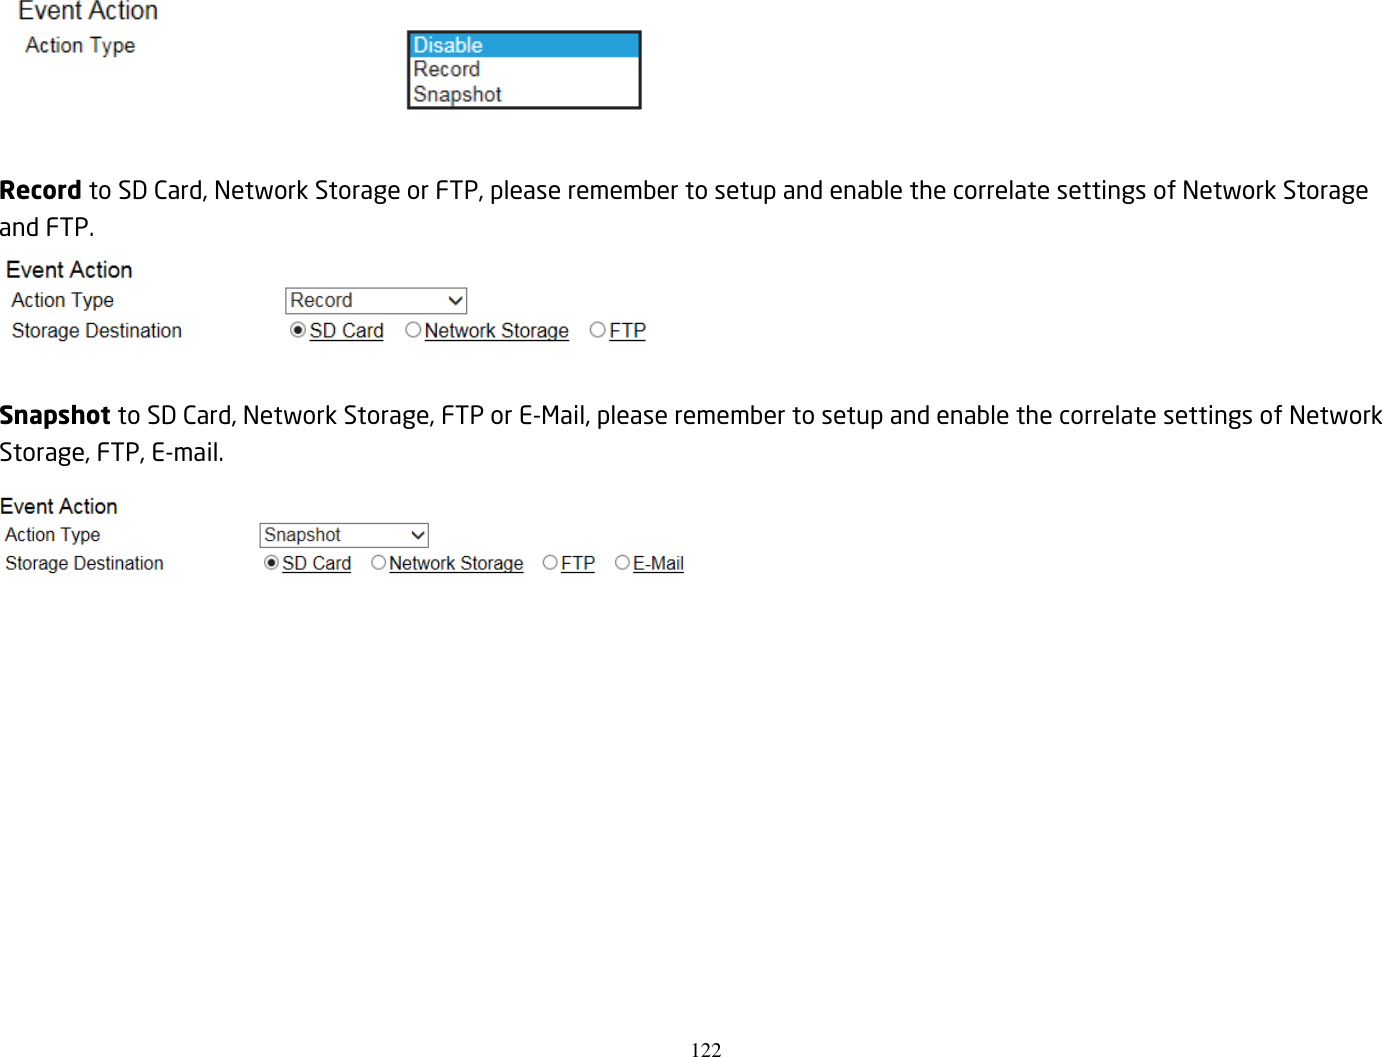 122    Record to SD Card, Network Storage or FTP, please remember to setup and enable the correlate settings of Network Storage and FTP.   Snapshot to SD Card, Network Storage, FTP or E-Mail, please remember to setup and enable the correlate settings of Network Storage, FTP, E-mail.  